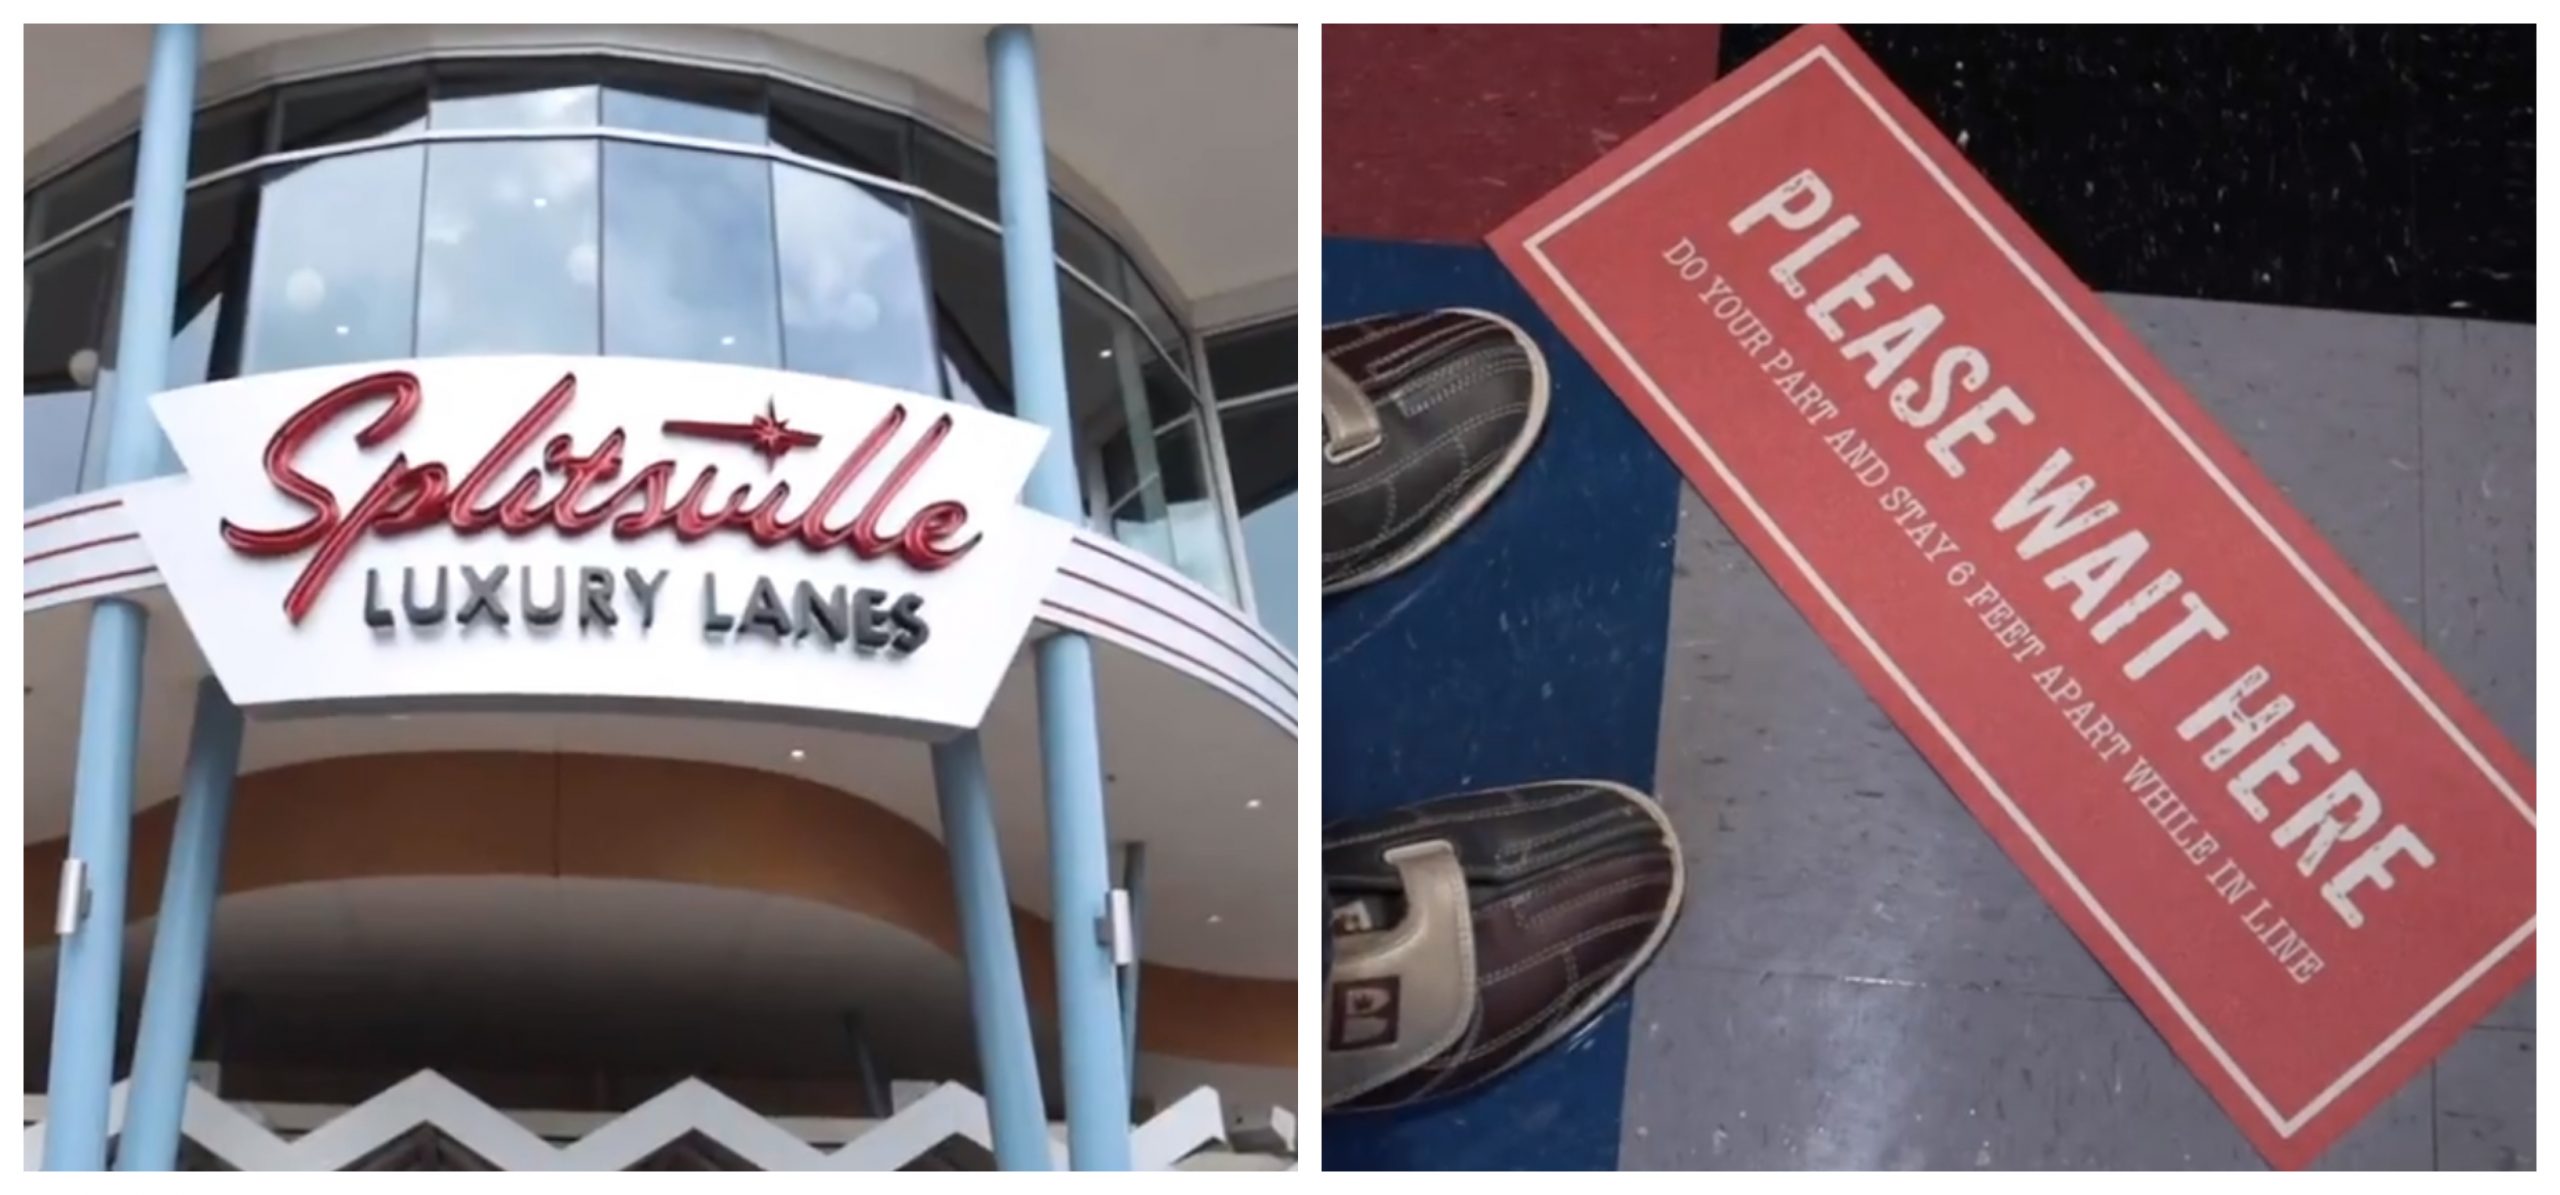 Splitsville shares what to expect when they reopen this week